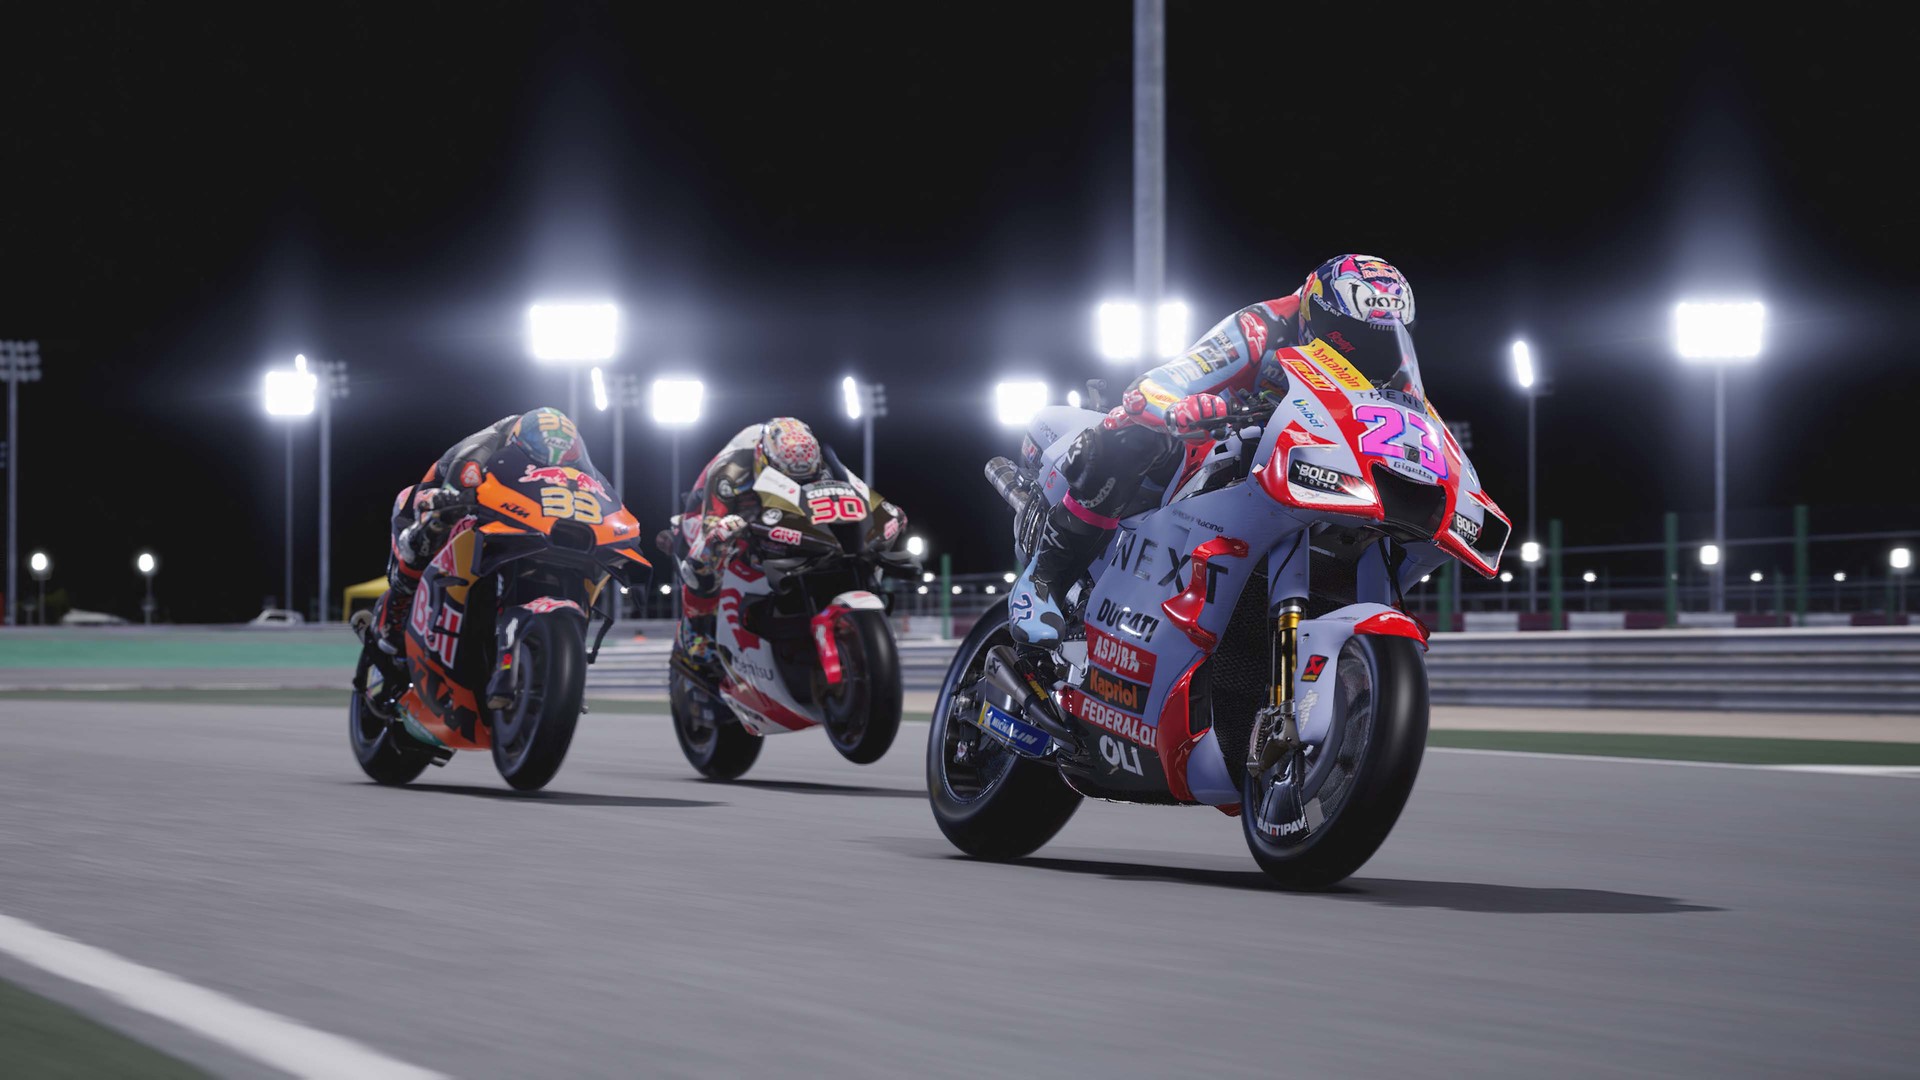 MotoGP 23 gameplay on Low End PC, NO Graphics Card